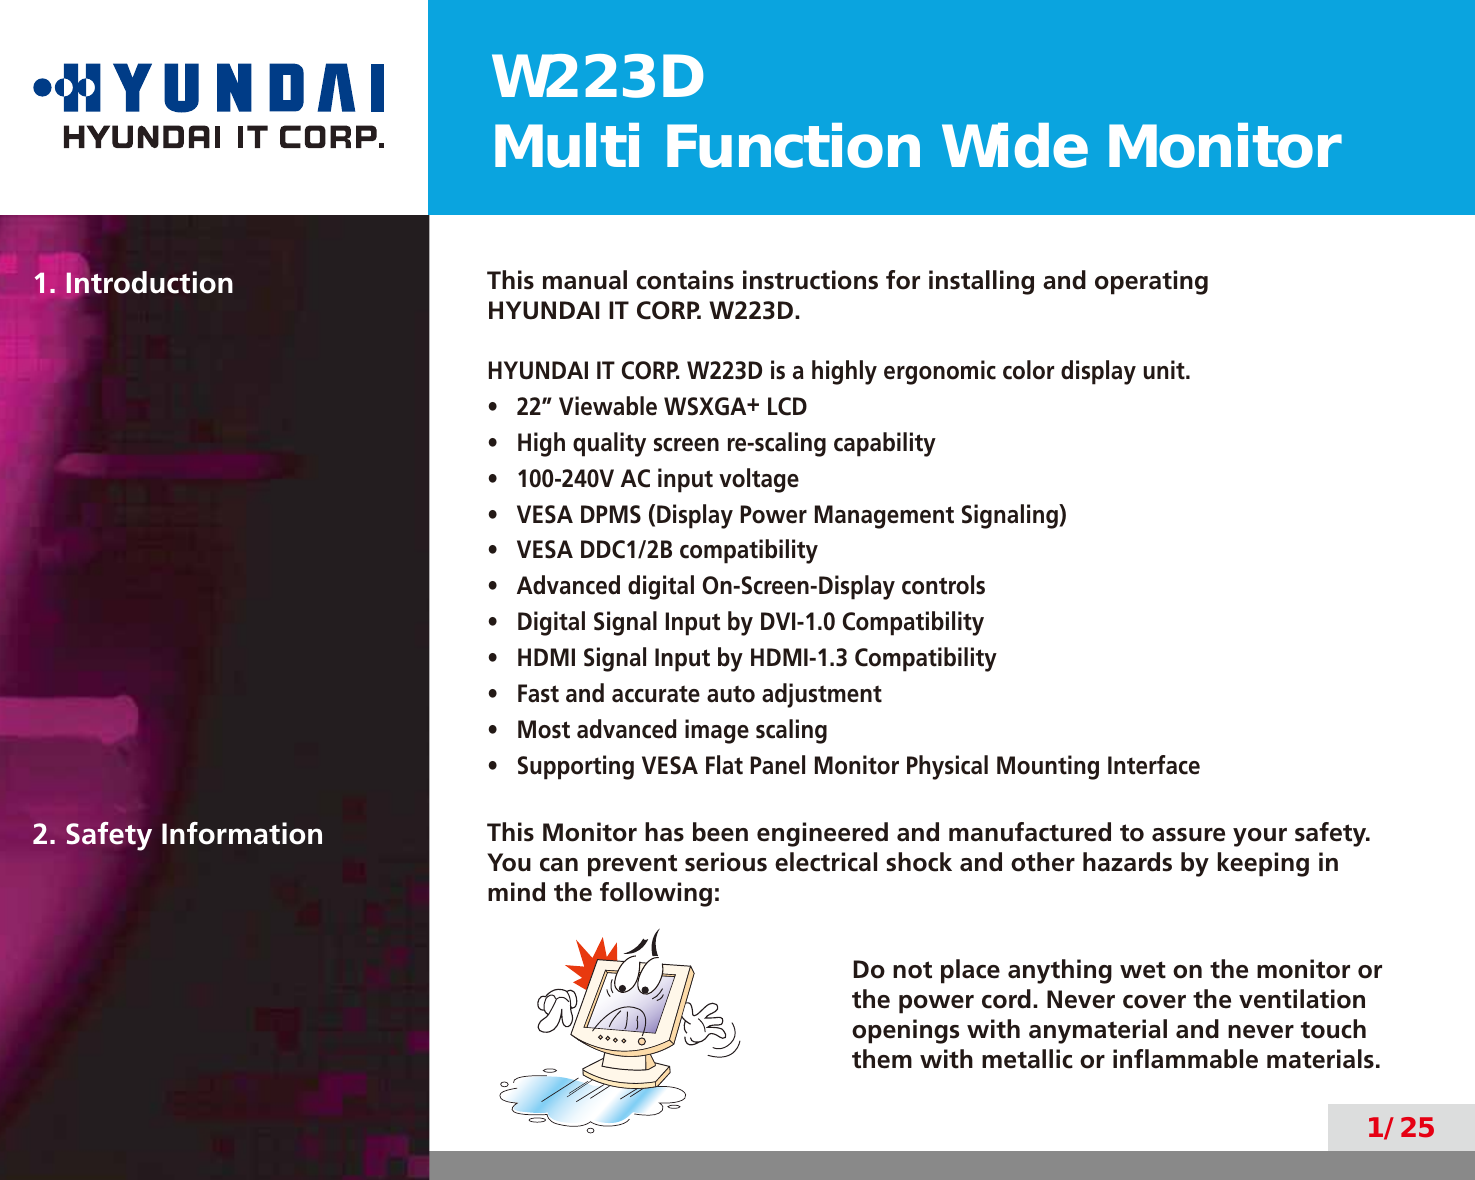 W223DMulti Function Wide Monitor1/251. Introduction This manual contains instructions for installing and operatingHYUNDAI IT CORP. W223D.HYUNDAI IT CORP. W223D is a highly ergonomic color display unit.•  22” Viewable WSXGA+ LCD•  High quality screen re-scaling capability•  100-240V AC input voltage•  VESA DPMS (Display Power Management Signaling)•  VESA DDC1/2B compatibility•  Advanced digital On-Screen-Display controls•  Digital Signal Input by DVI-1.0 Compatibility•  HDMI Signal Input by HDMI-1.3 Compatibility•  Fast and accurate auto adjustment•  Most advanced image scaling•  Supporting VESA Flat Panel Monitor Physical Mounting Interface2. Safety Information This Monitor has been engineered and manufactured to assure your safety. You can prevent serious electrical shock and other hazards by keeping in mind the following:Do not place anything wet on the monitor or the power cord. Never cover the ventilation openings with anymaterial and never touch them with metallic or inﬂammable materials.